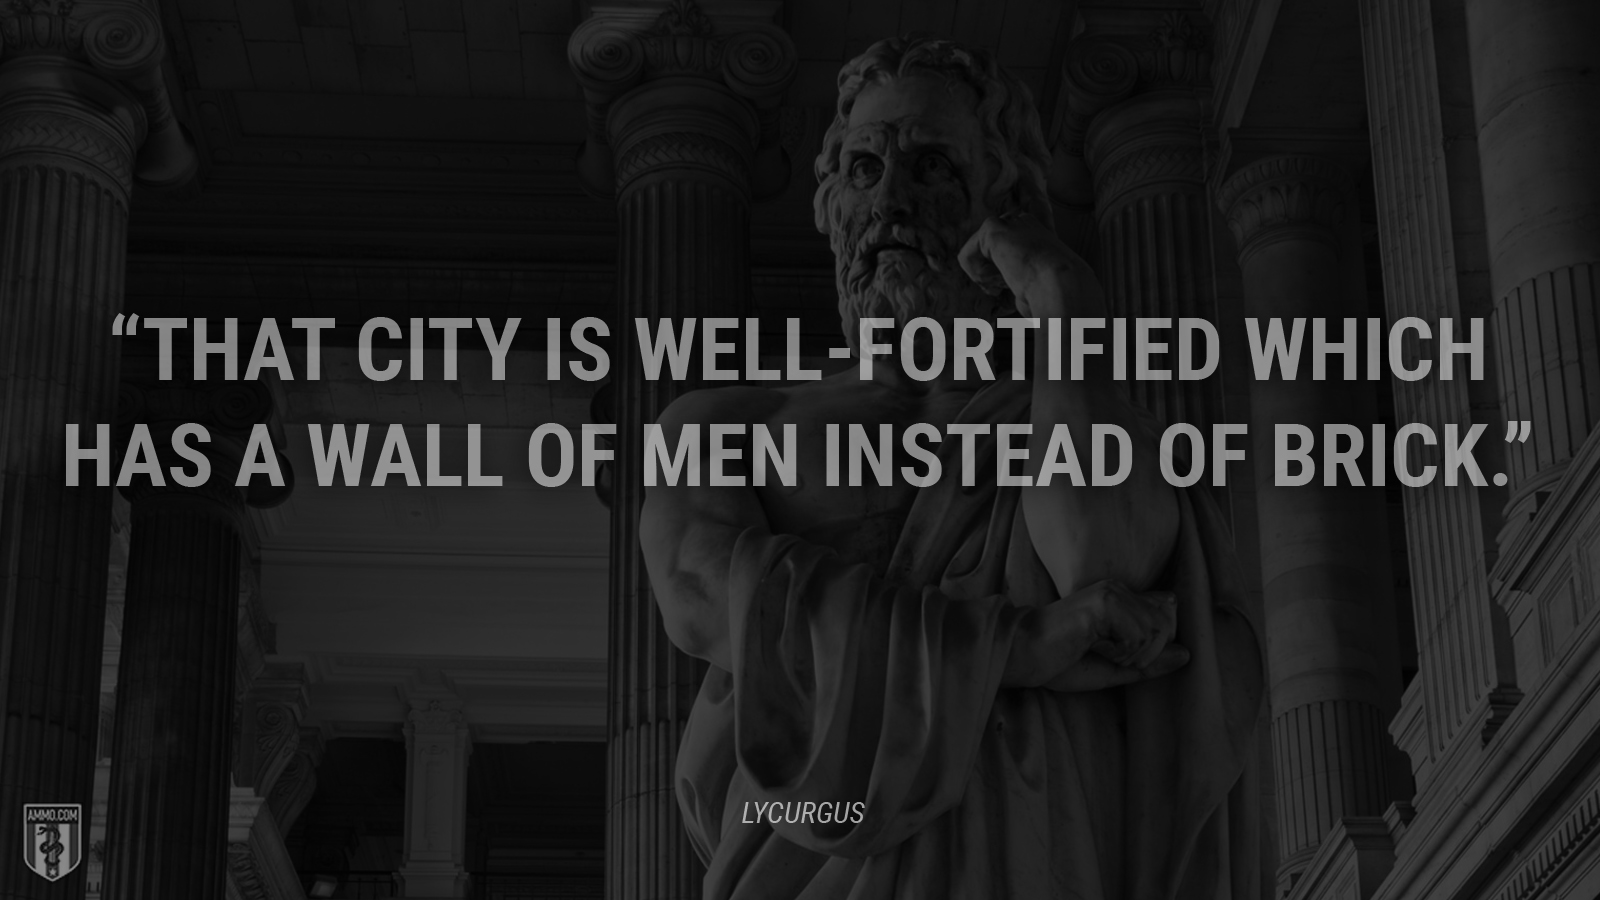 “That city is well-fortified which has a wall of men instead of brick.” - Lycurgus